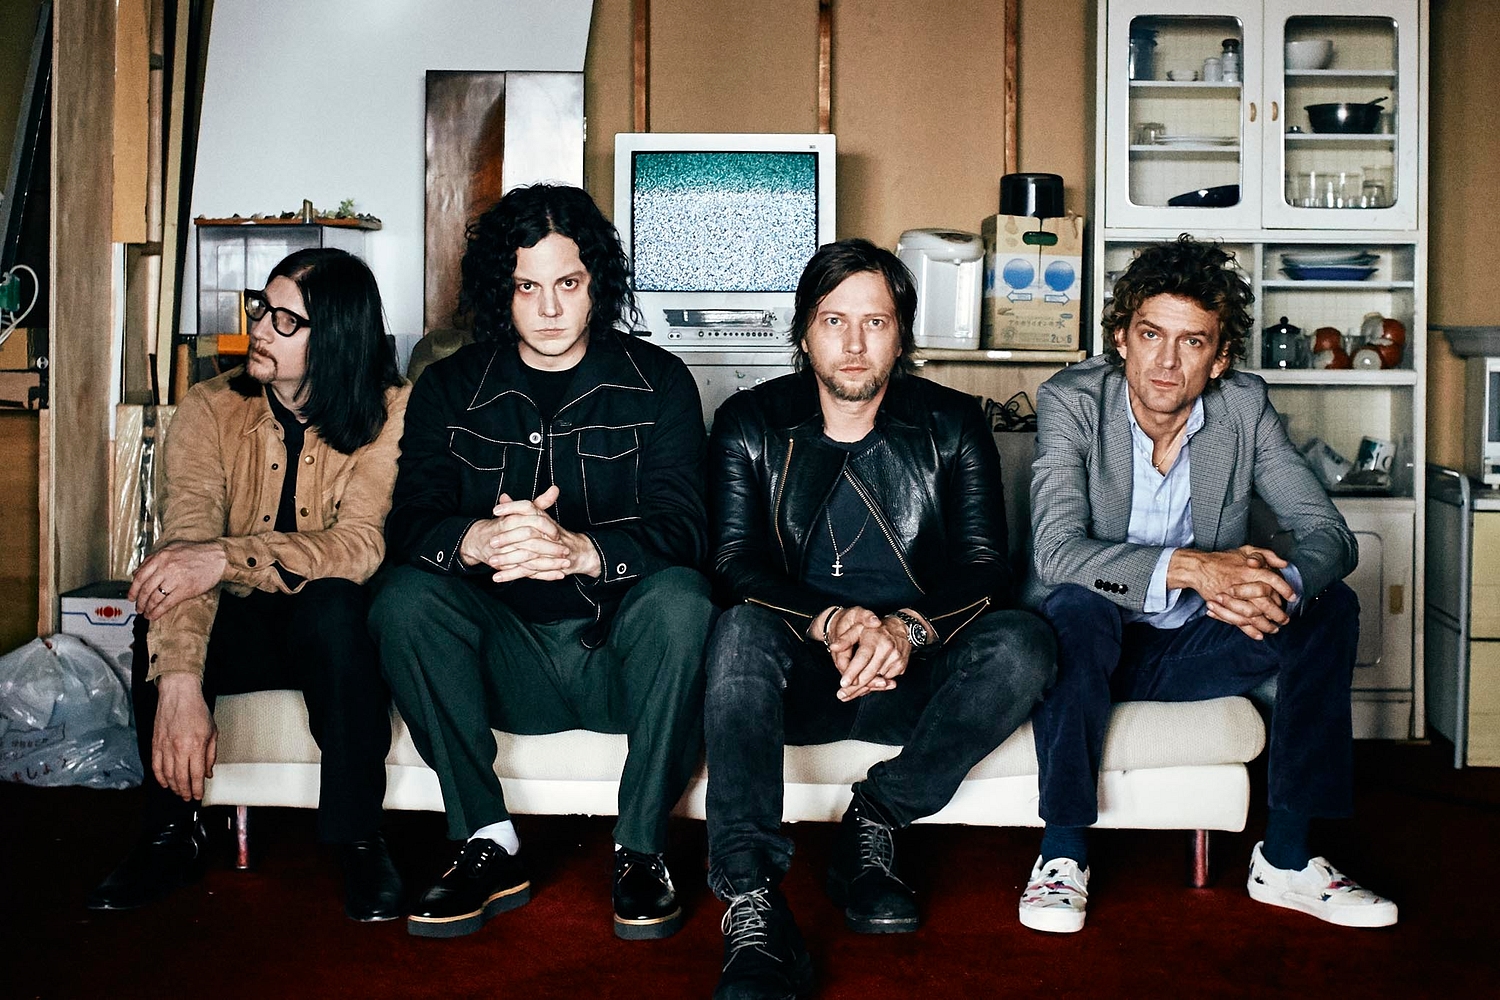 Get an insight into the return of The Raconteurs with TIDAL’s In Conversation series